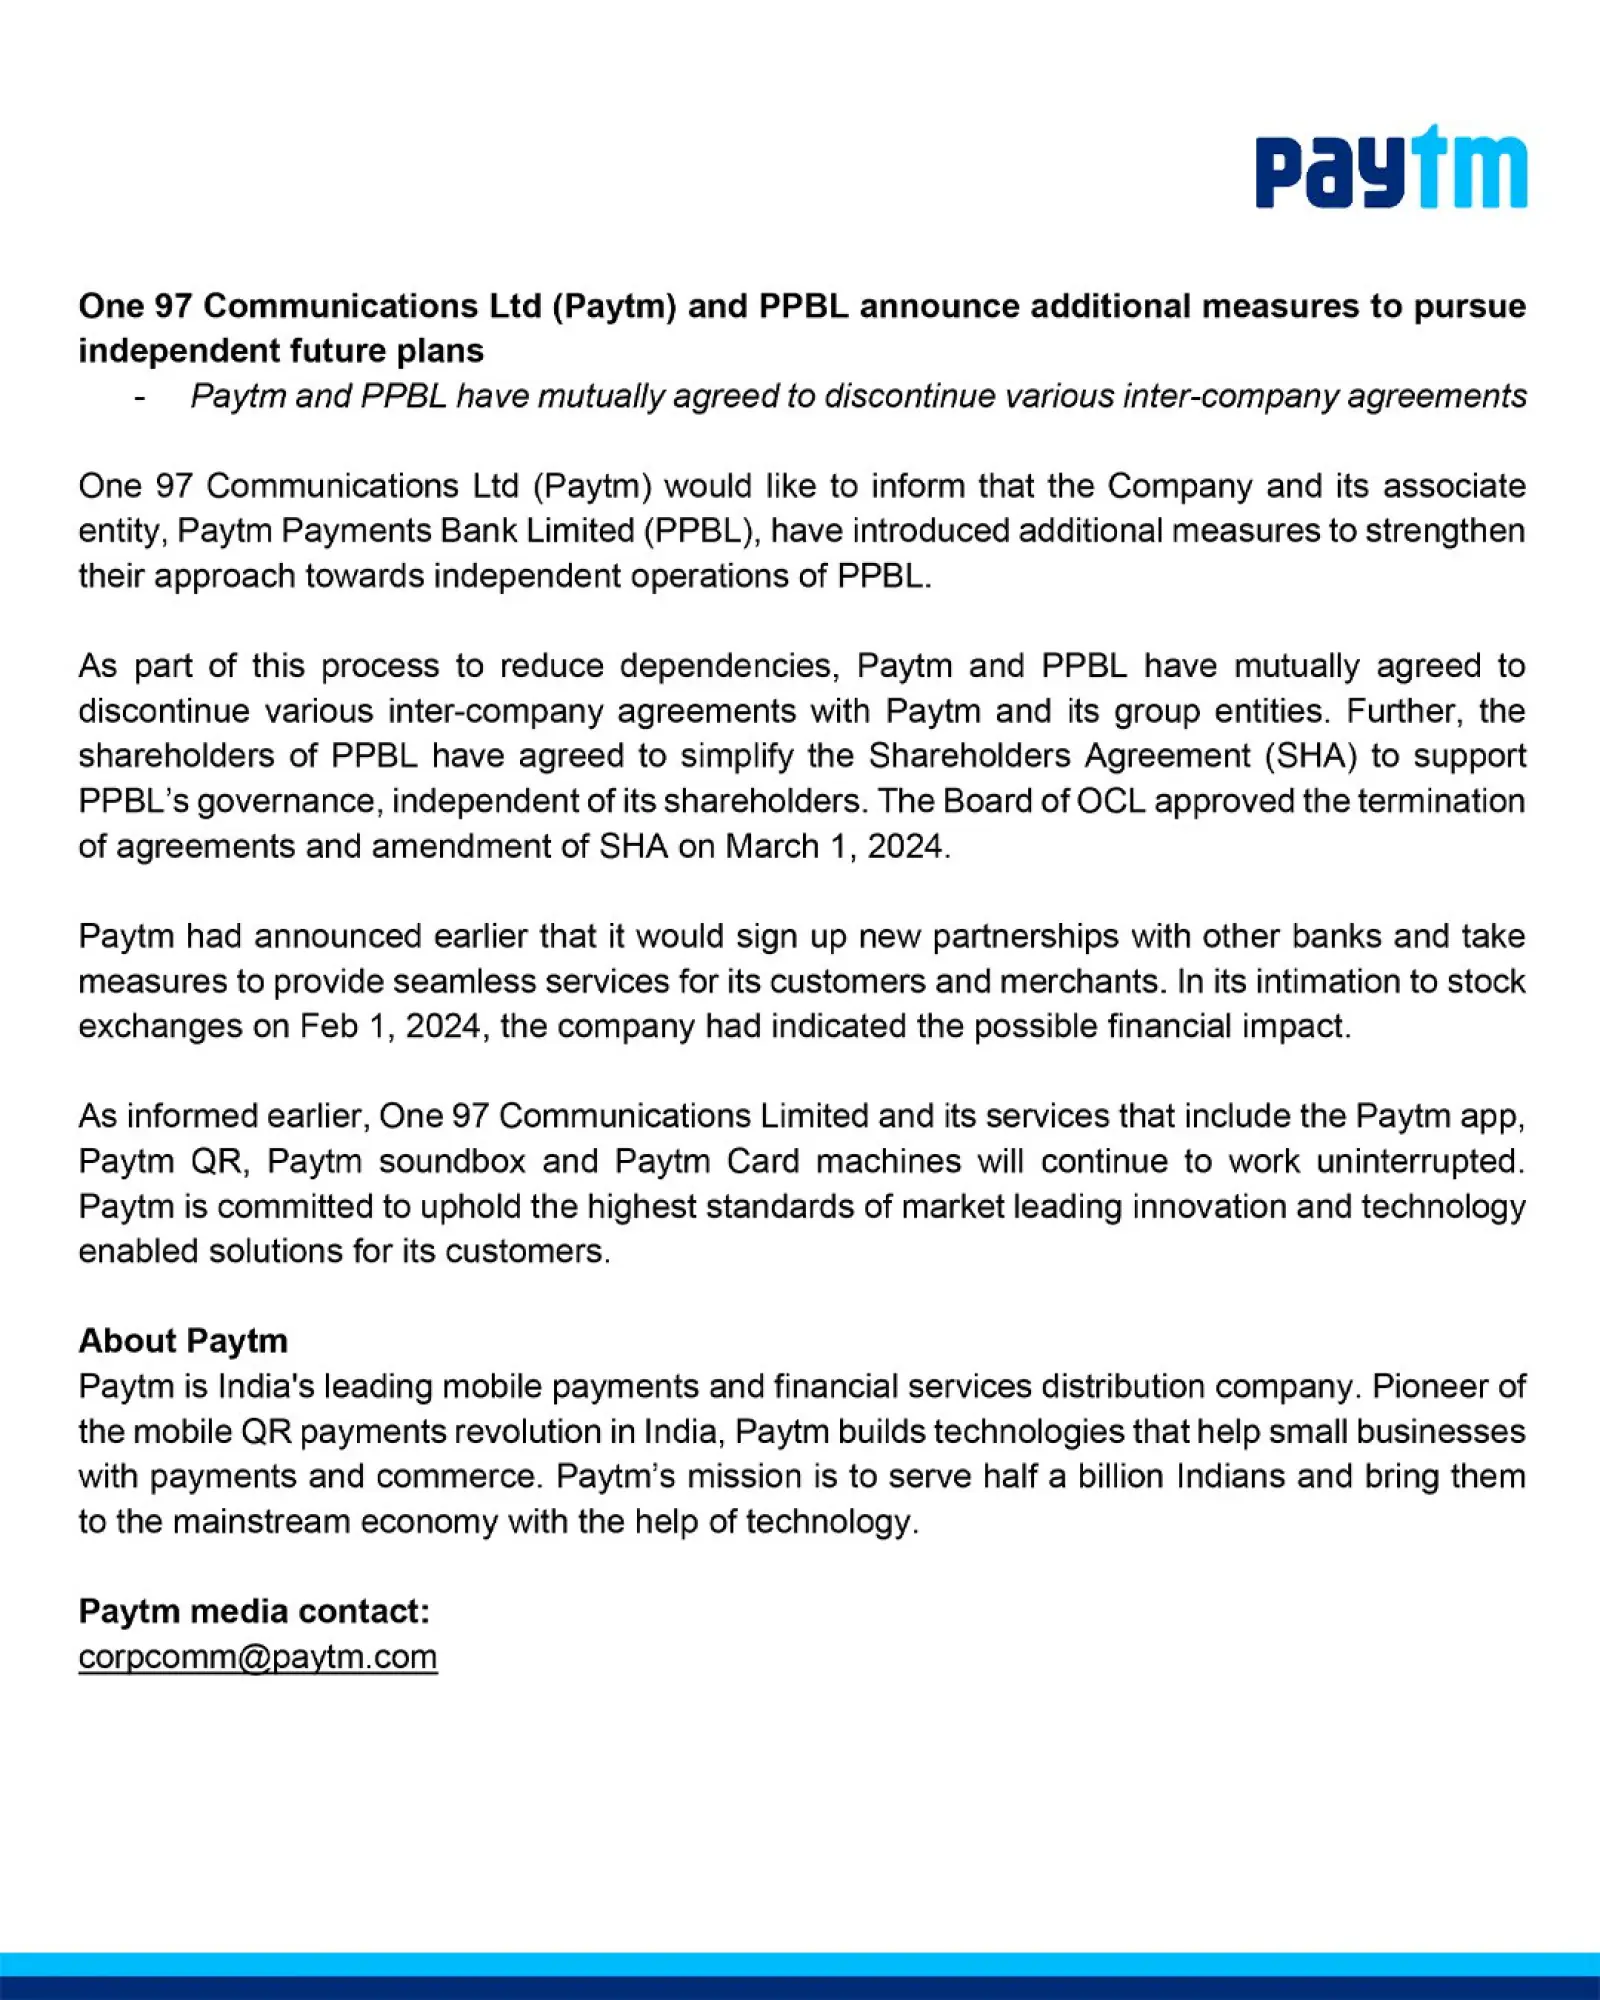 Big update regarding Paytm, Paytm and Paytm Payments Bank together took an important decision